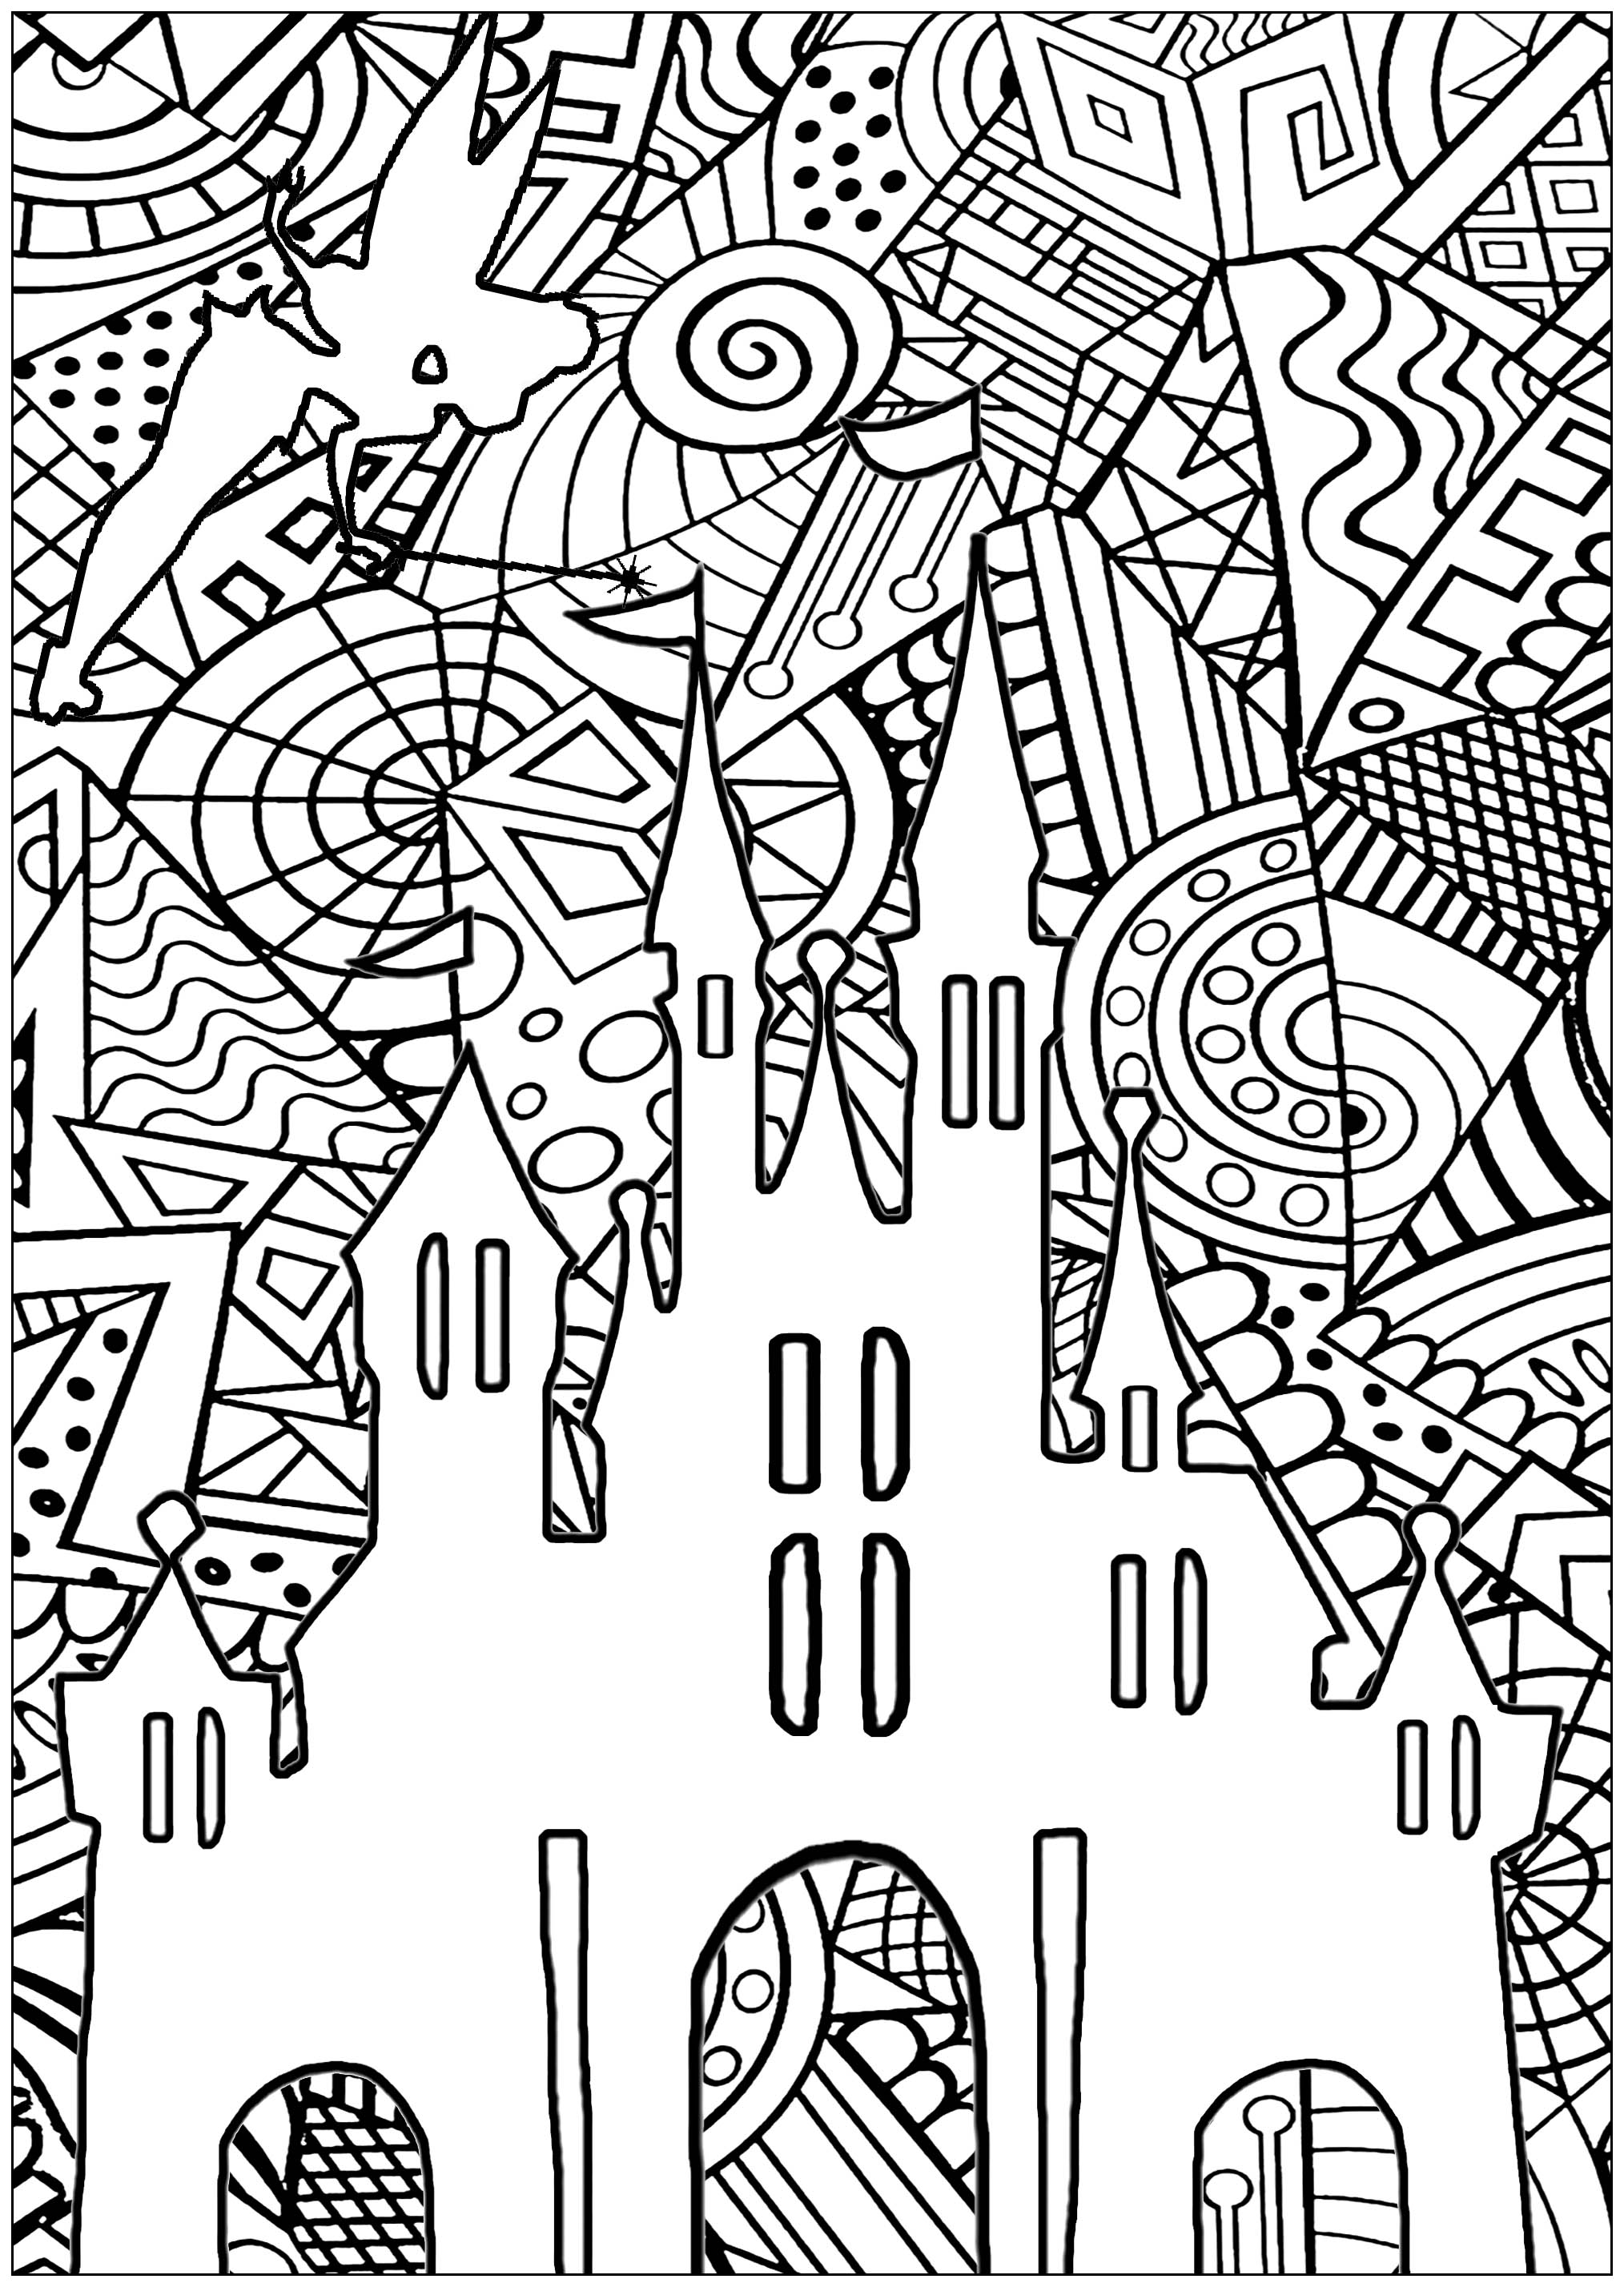 Disney Coloring Pages For Adults - Coloring - Sofa - Divano